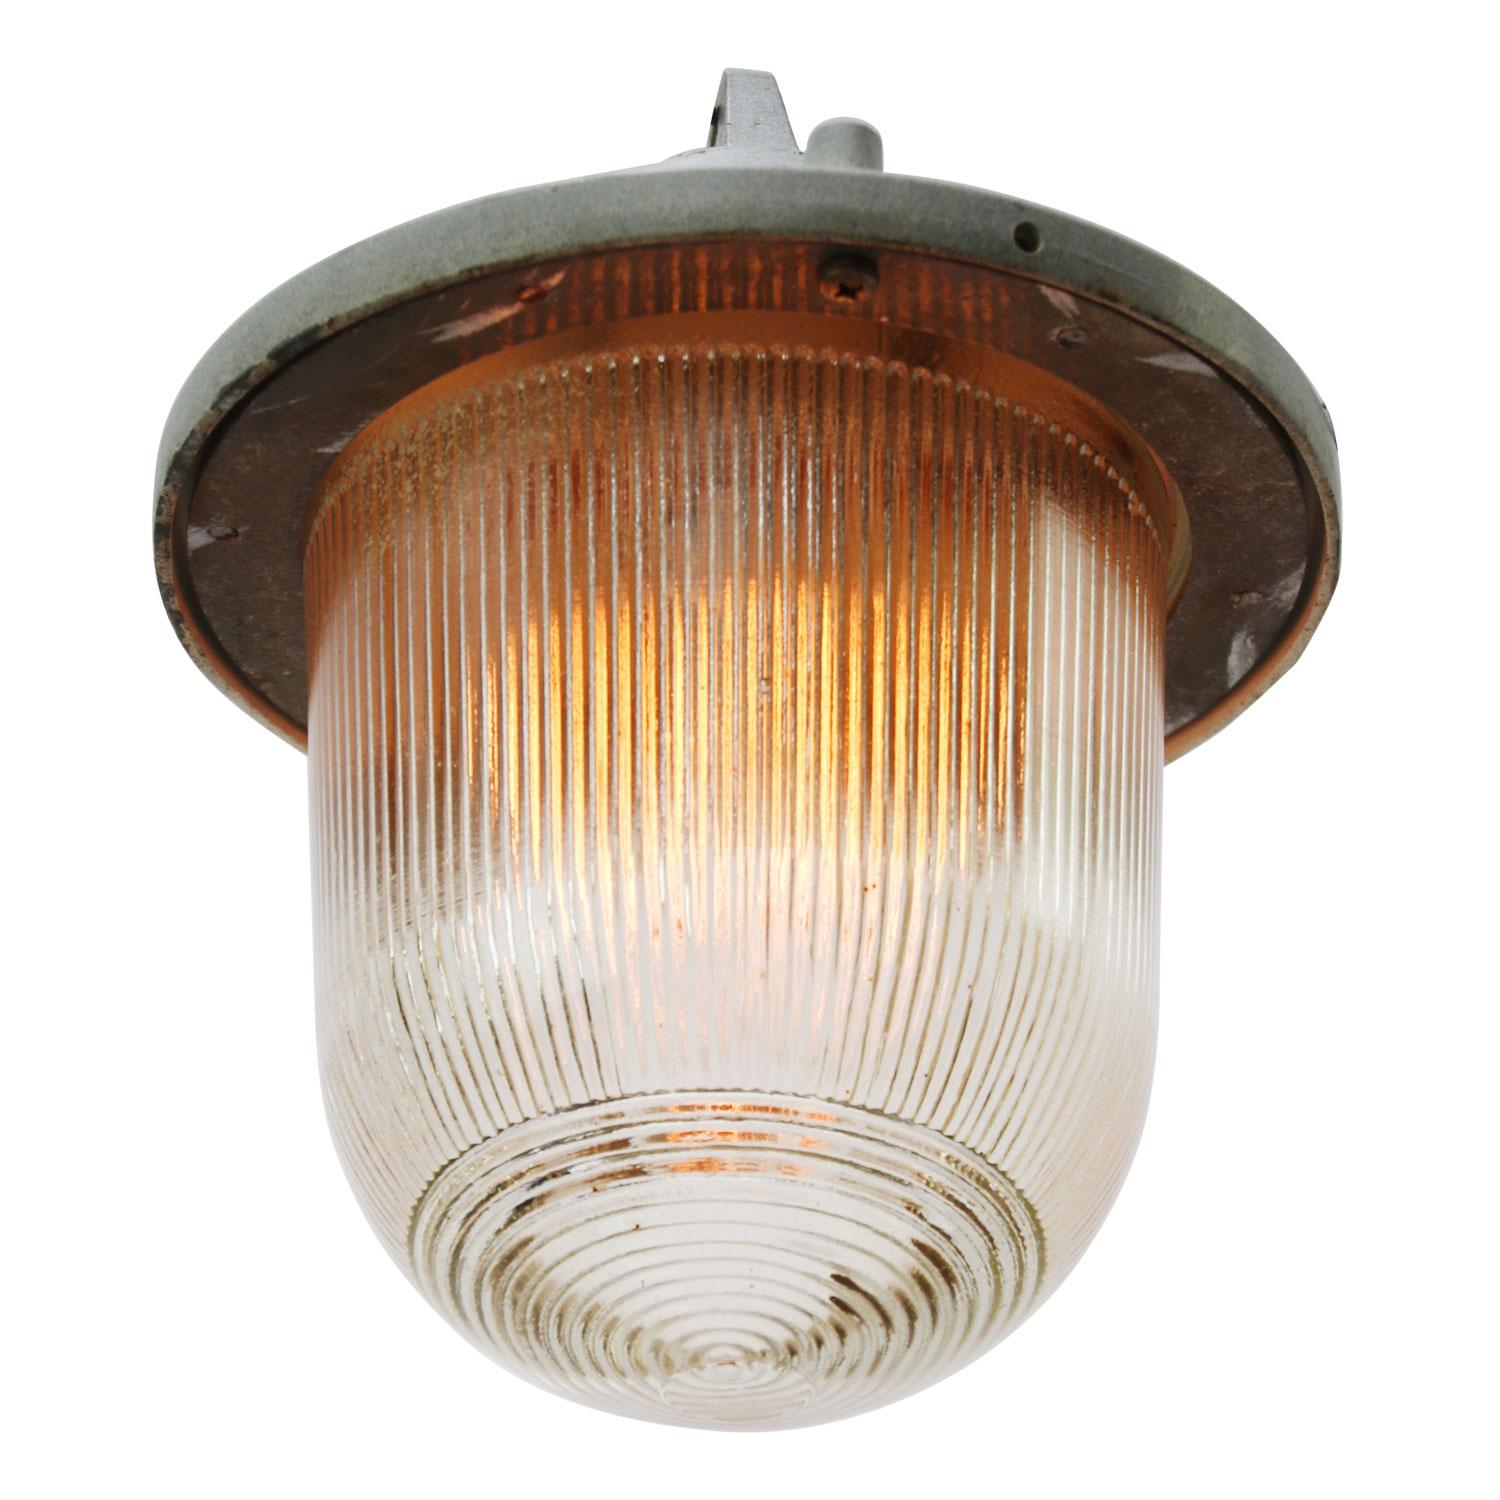 Hanging lamp striped glass. Gray top with cast aluminum top.

Weight: 2.9 kg / 6.4 lb

All lamps have been made suitable by international standards for incandescent light bulbs, energy-efficient and LED bulbs. E26/E27 bulb holders and new wiring